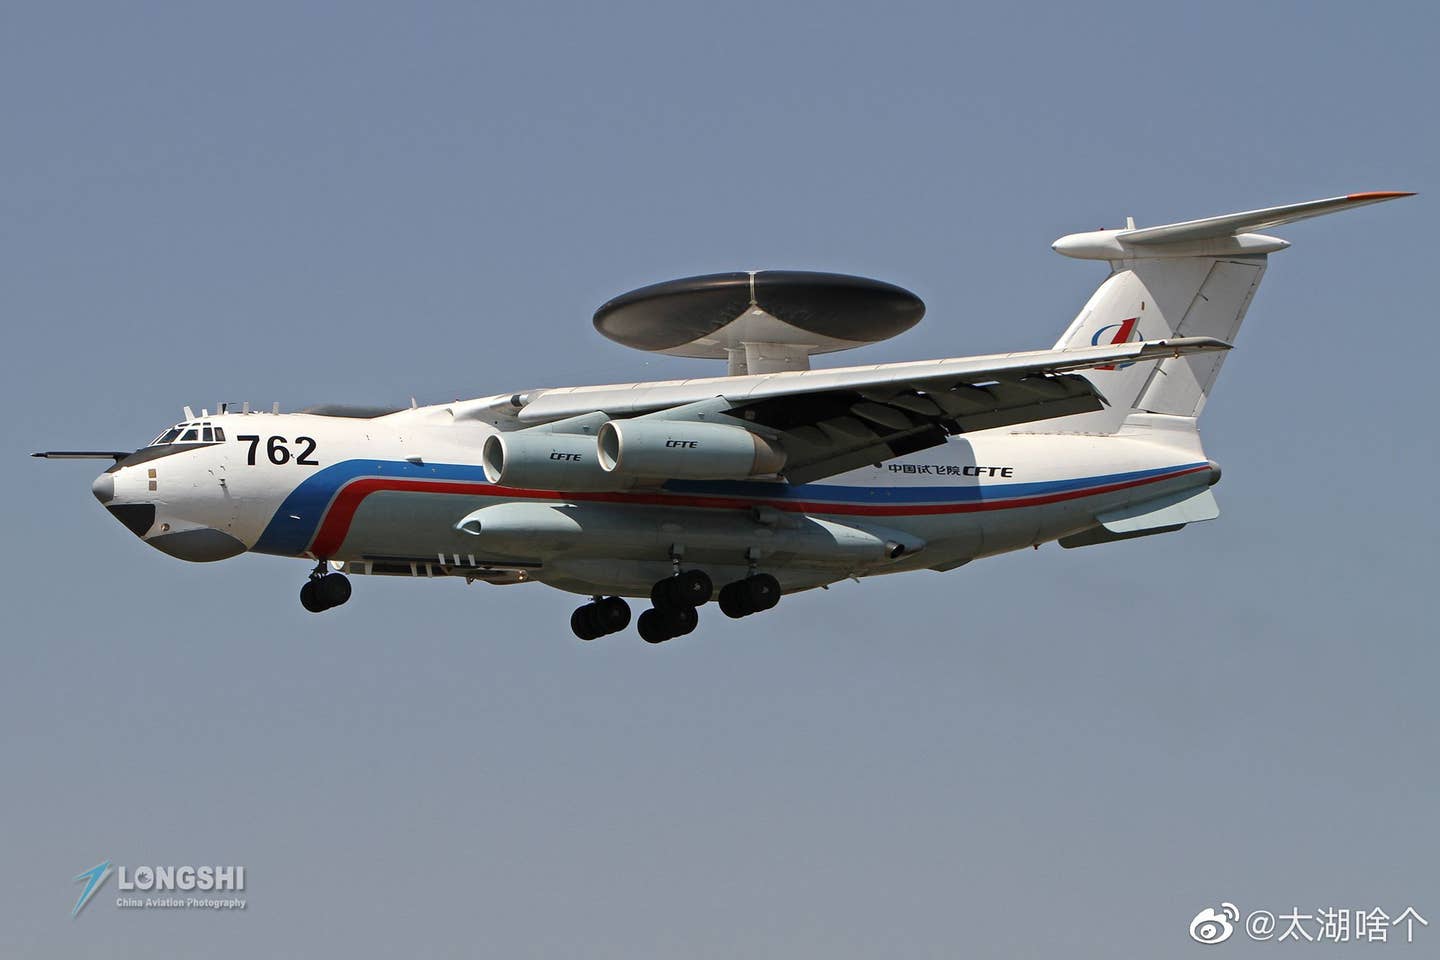 After its return from Israel, the former A-50I prototype became the prototype for the KJ-2000 and received this China Flight Test Establishment color scheme. <em>Longshi/via Chinese internet</em>